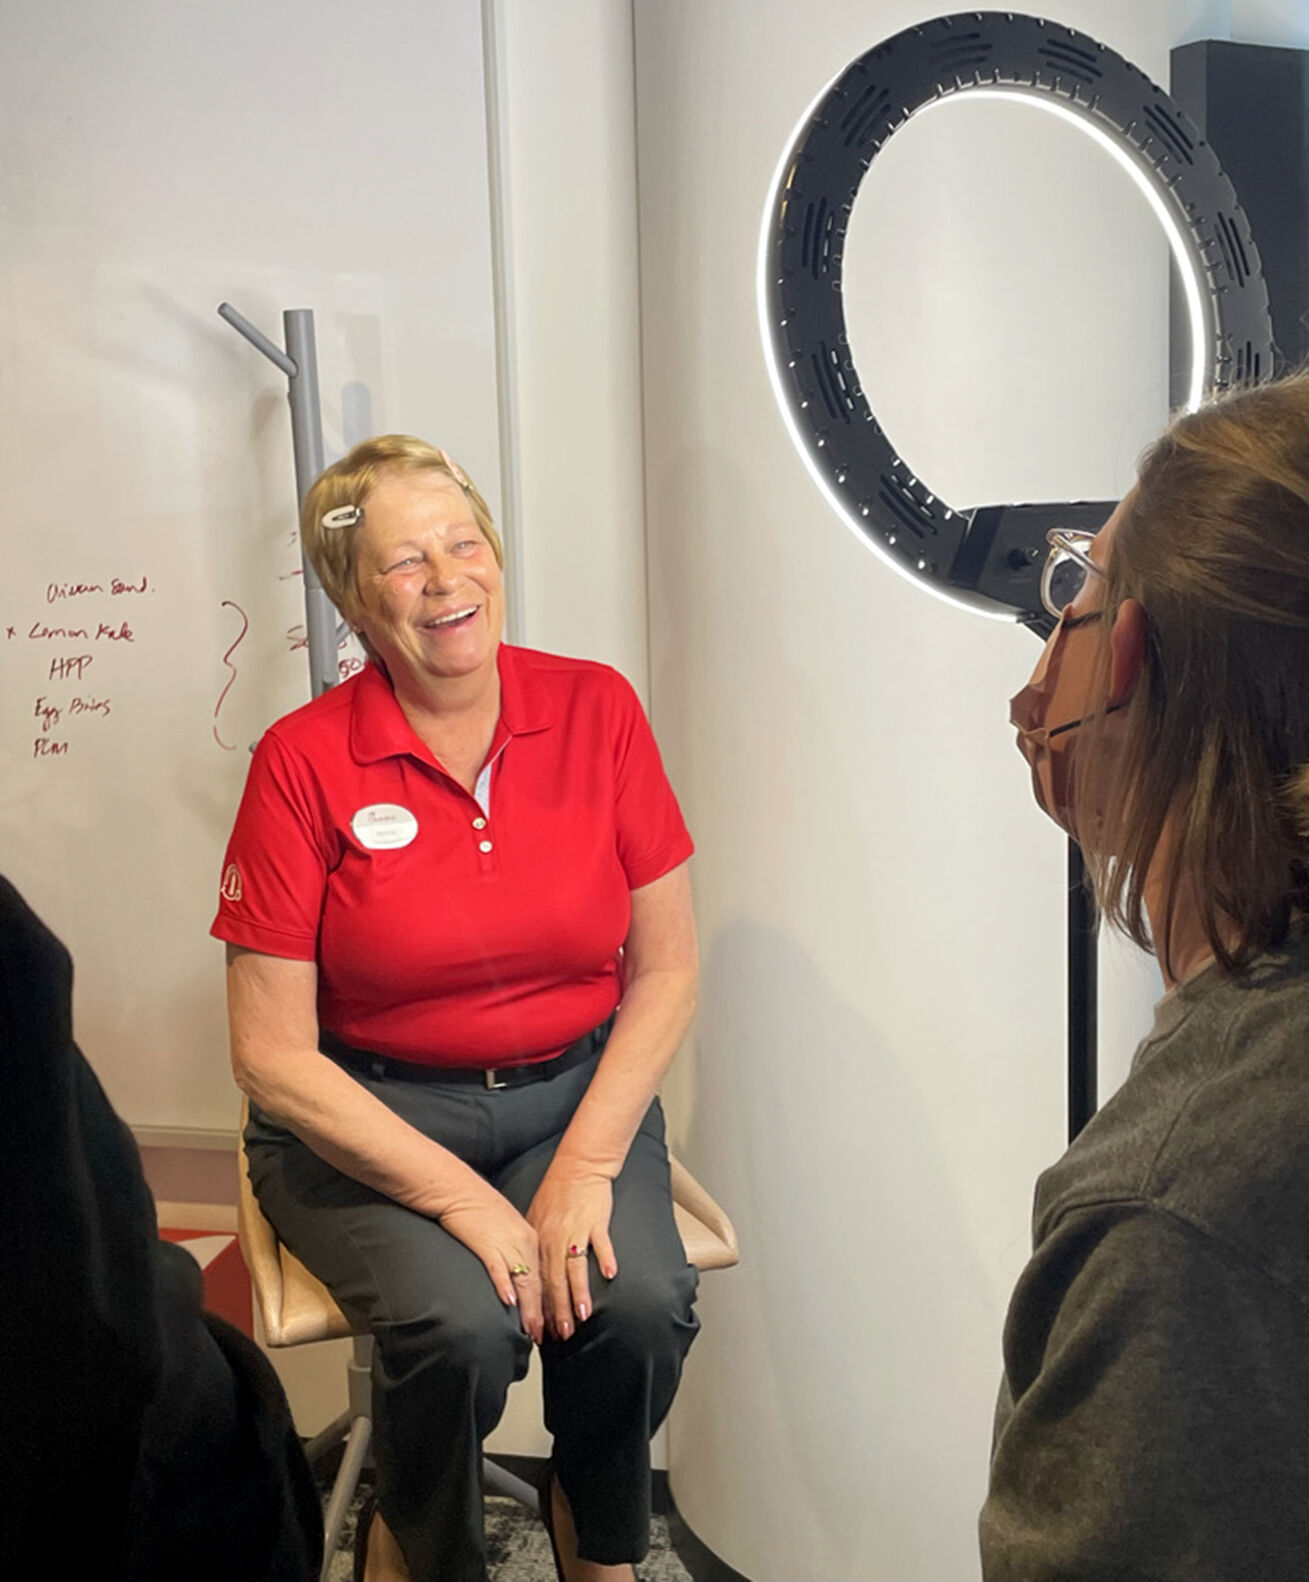 Bernie Tigges, an employee at Dubuque’s Chick-fil-A restaurant, was under the spotlight to film a commercial for the business that is currently airing nationwide.    PHOTO CREDIT: Contributed